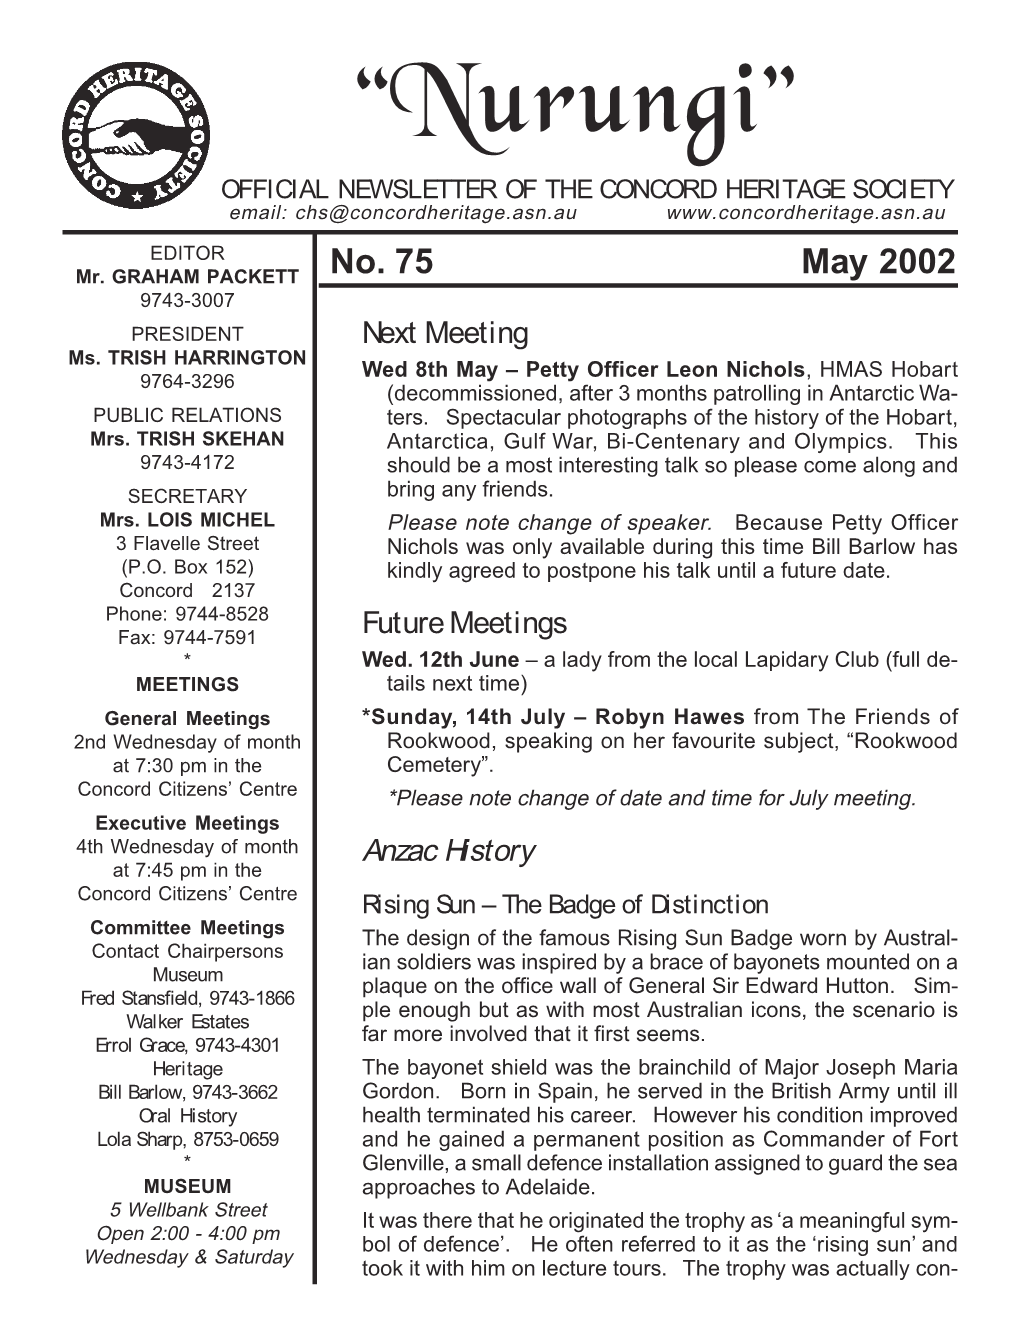 Ònurungió OFFICIAL NEWSLETTER of the CONCORD HERITAGE SOCIETY Email: Chs@Concordheritage.Asn.Au